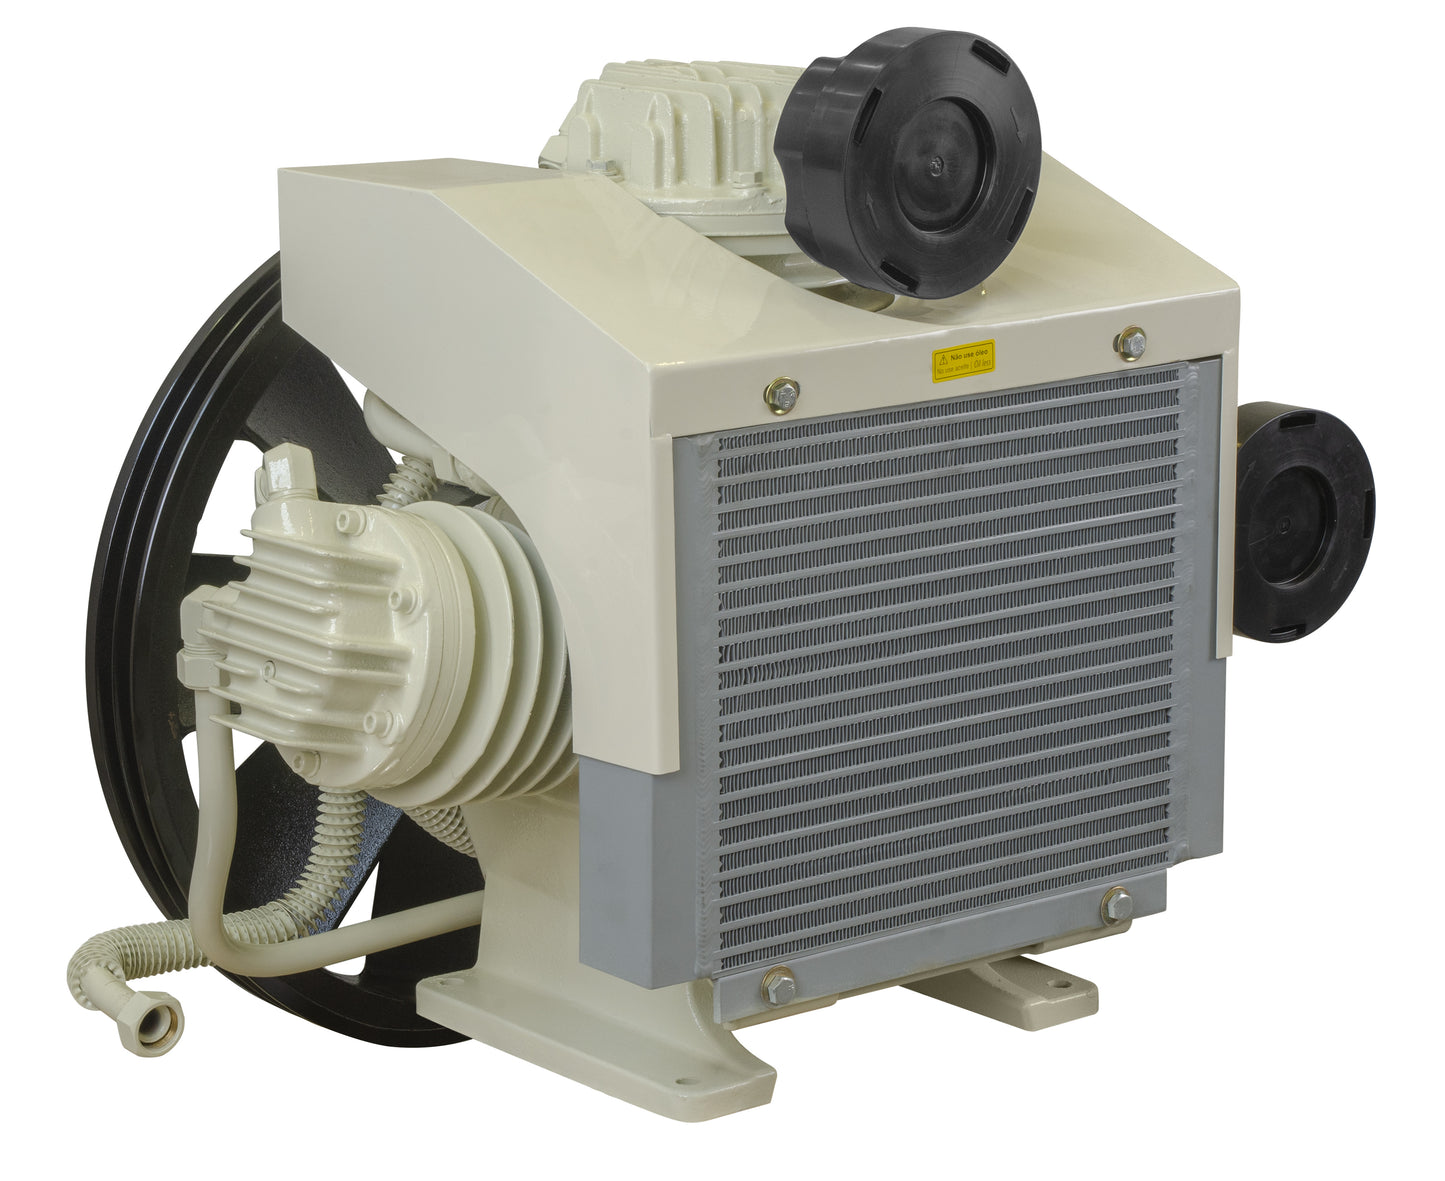 Schulz of America 15120HW60-3 120 PSI Two-Stage Oil-Less Horizontal Air Compressor